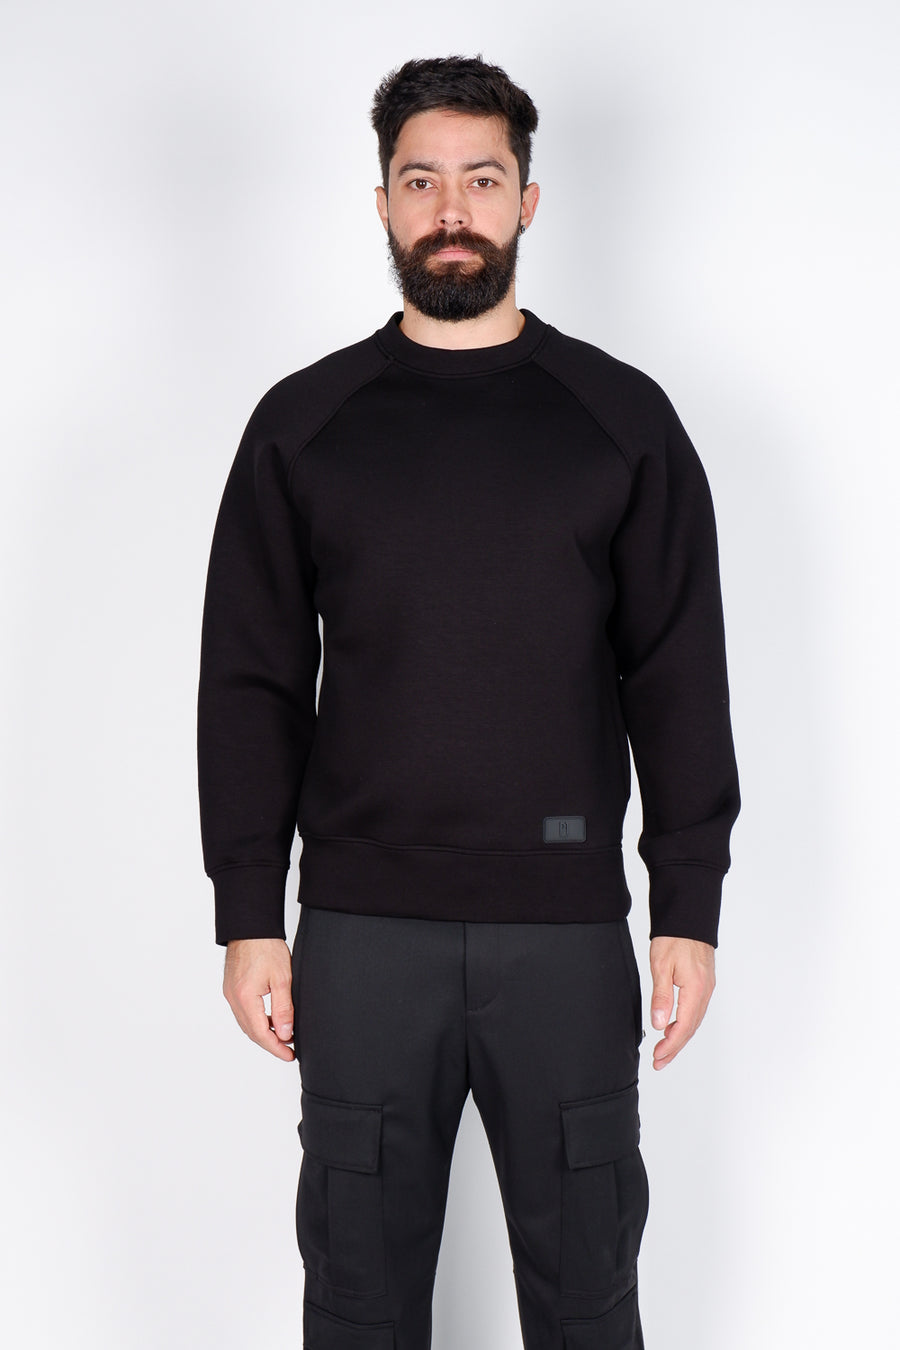 Buy the PT Torino Neoprene Sweatshirt Black at Intro. Spend £50 for free UK delivery. Official stockists. We ship worldwide.